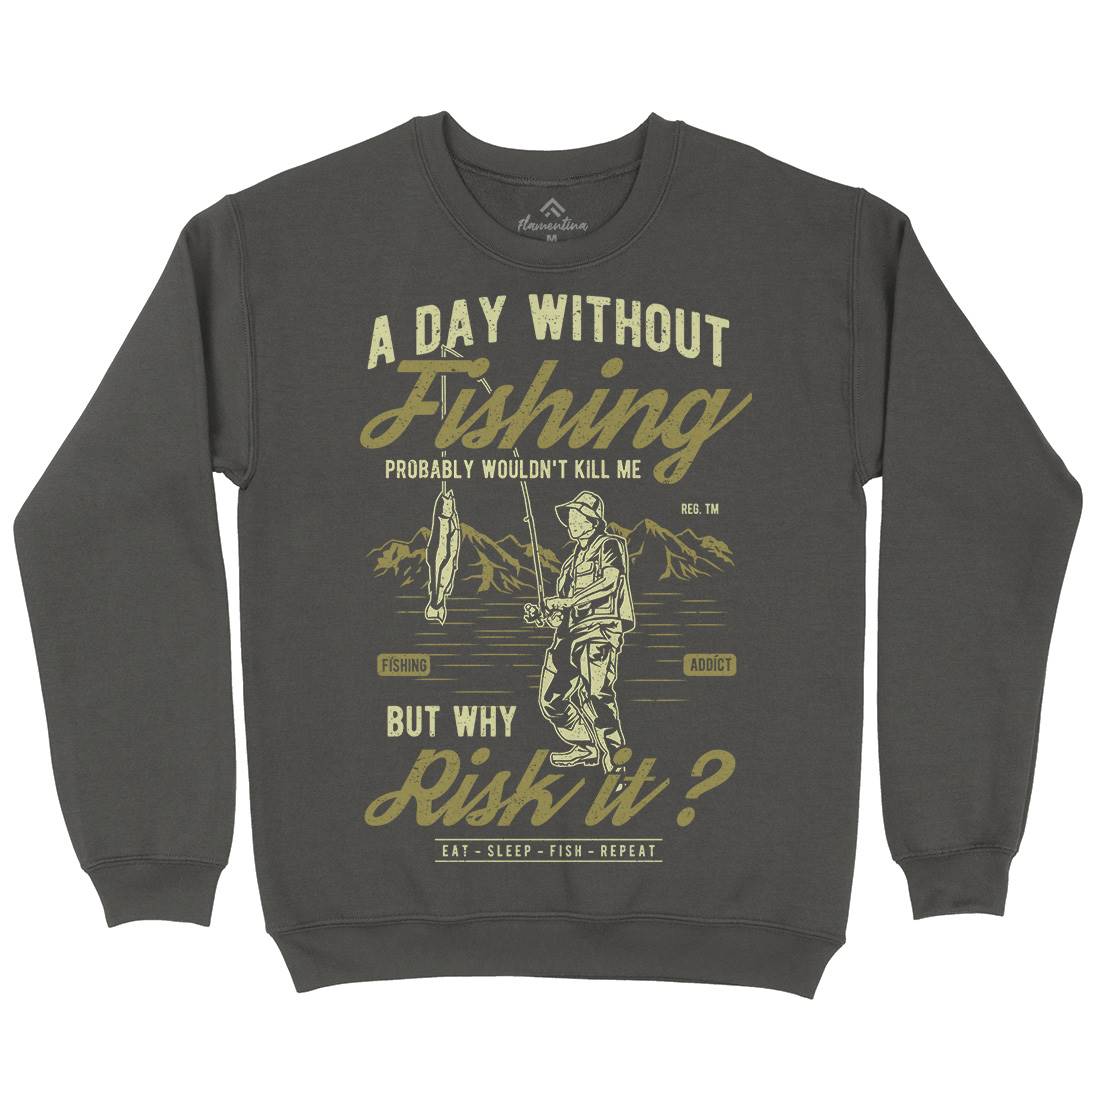 A Day Without Kids Crew Neck Sweatshirt Fishing A602